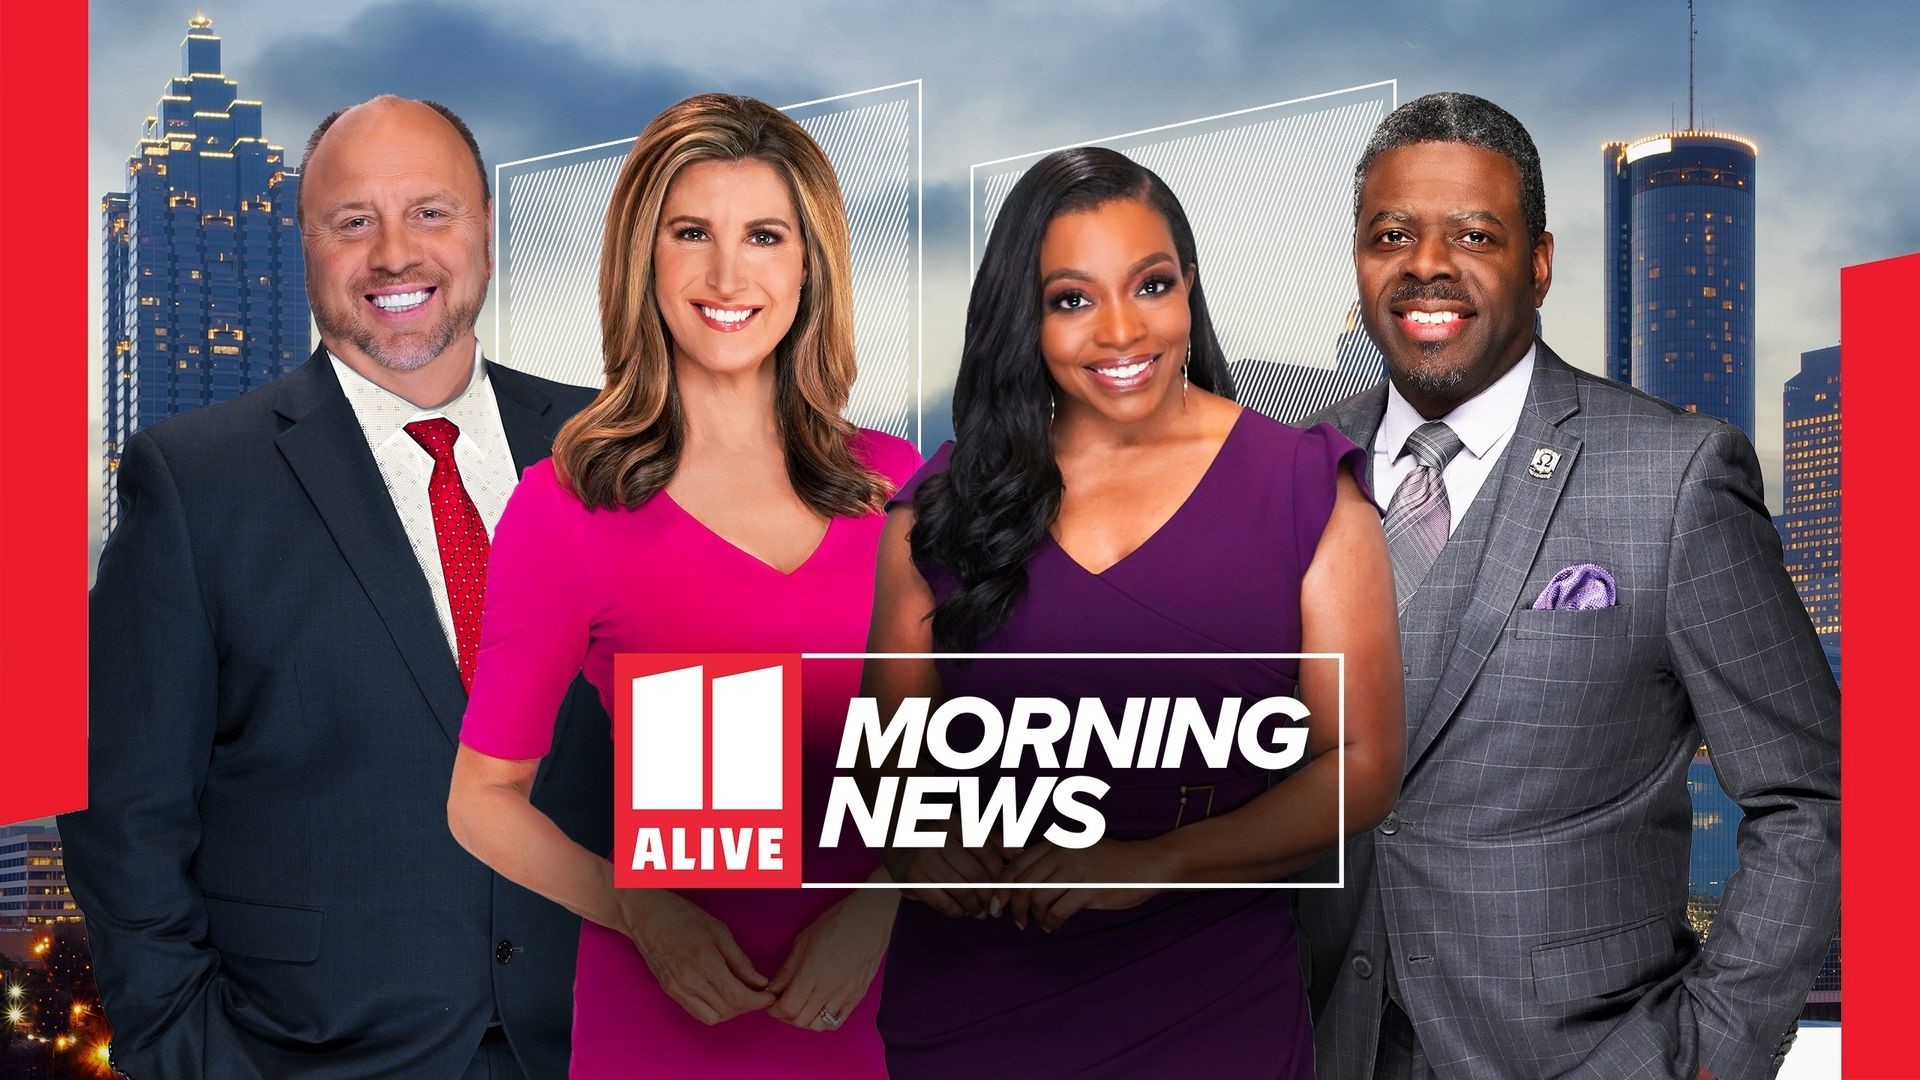 Watch overnight and breaking news, weather and traffic for metro Atlanta.